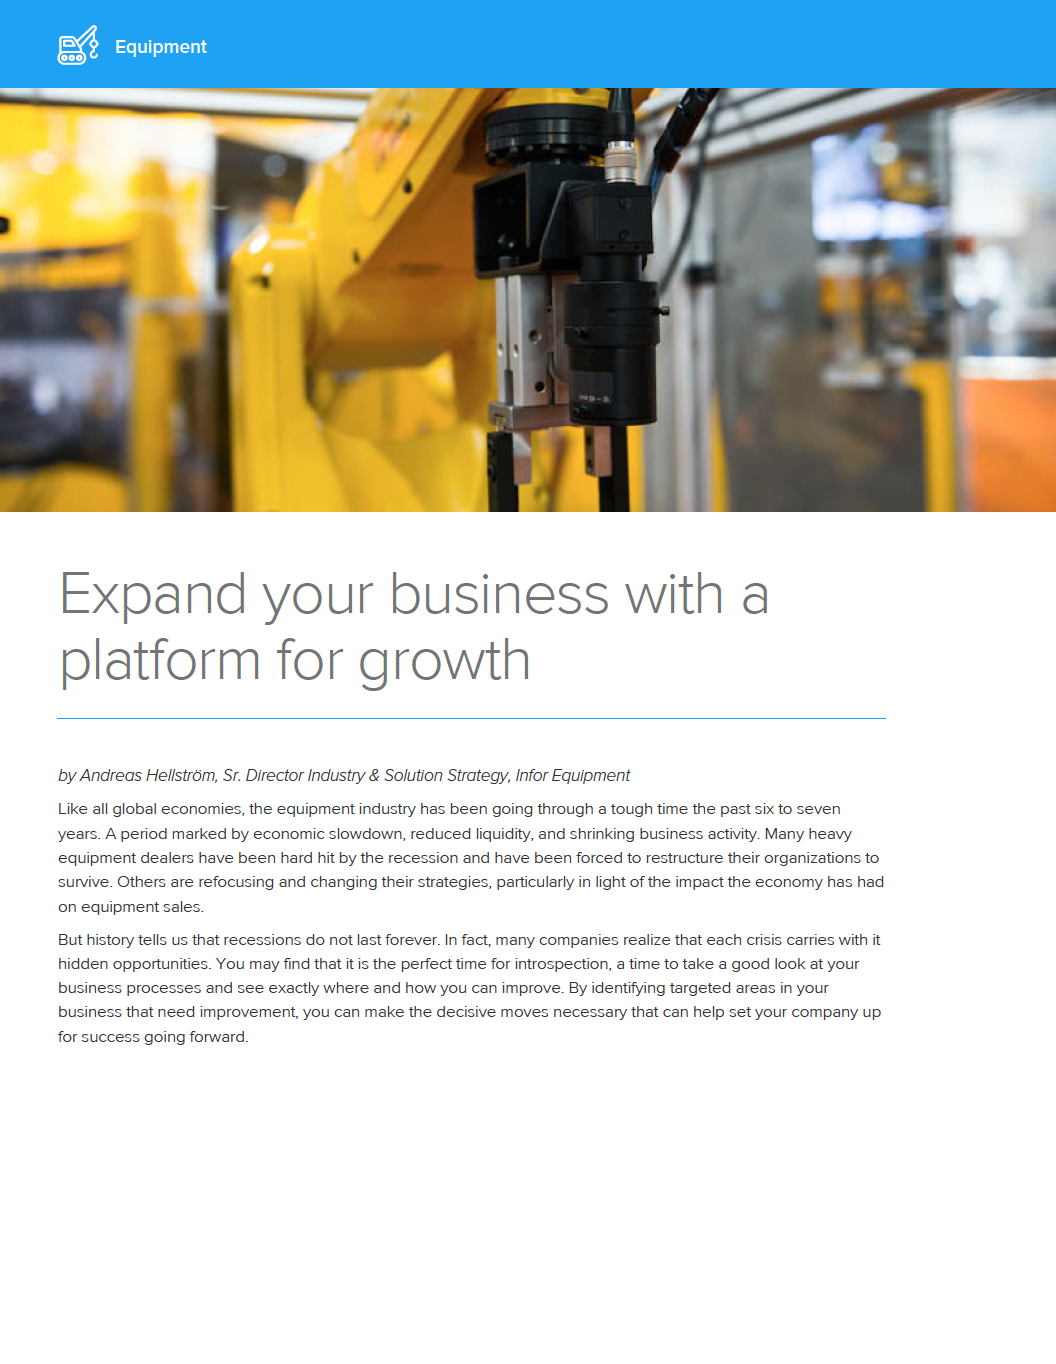 Manufacturing: Expand Your Business with a Platform for Growth